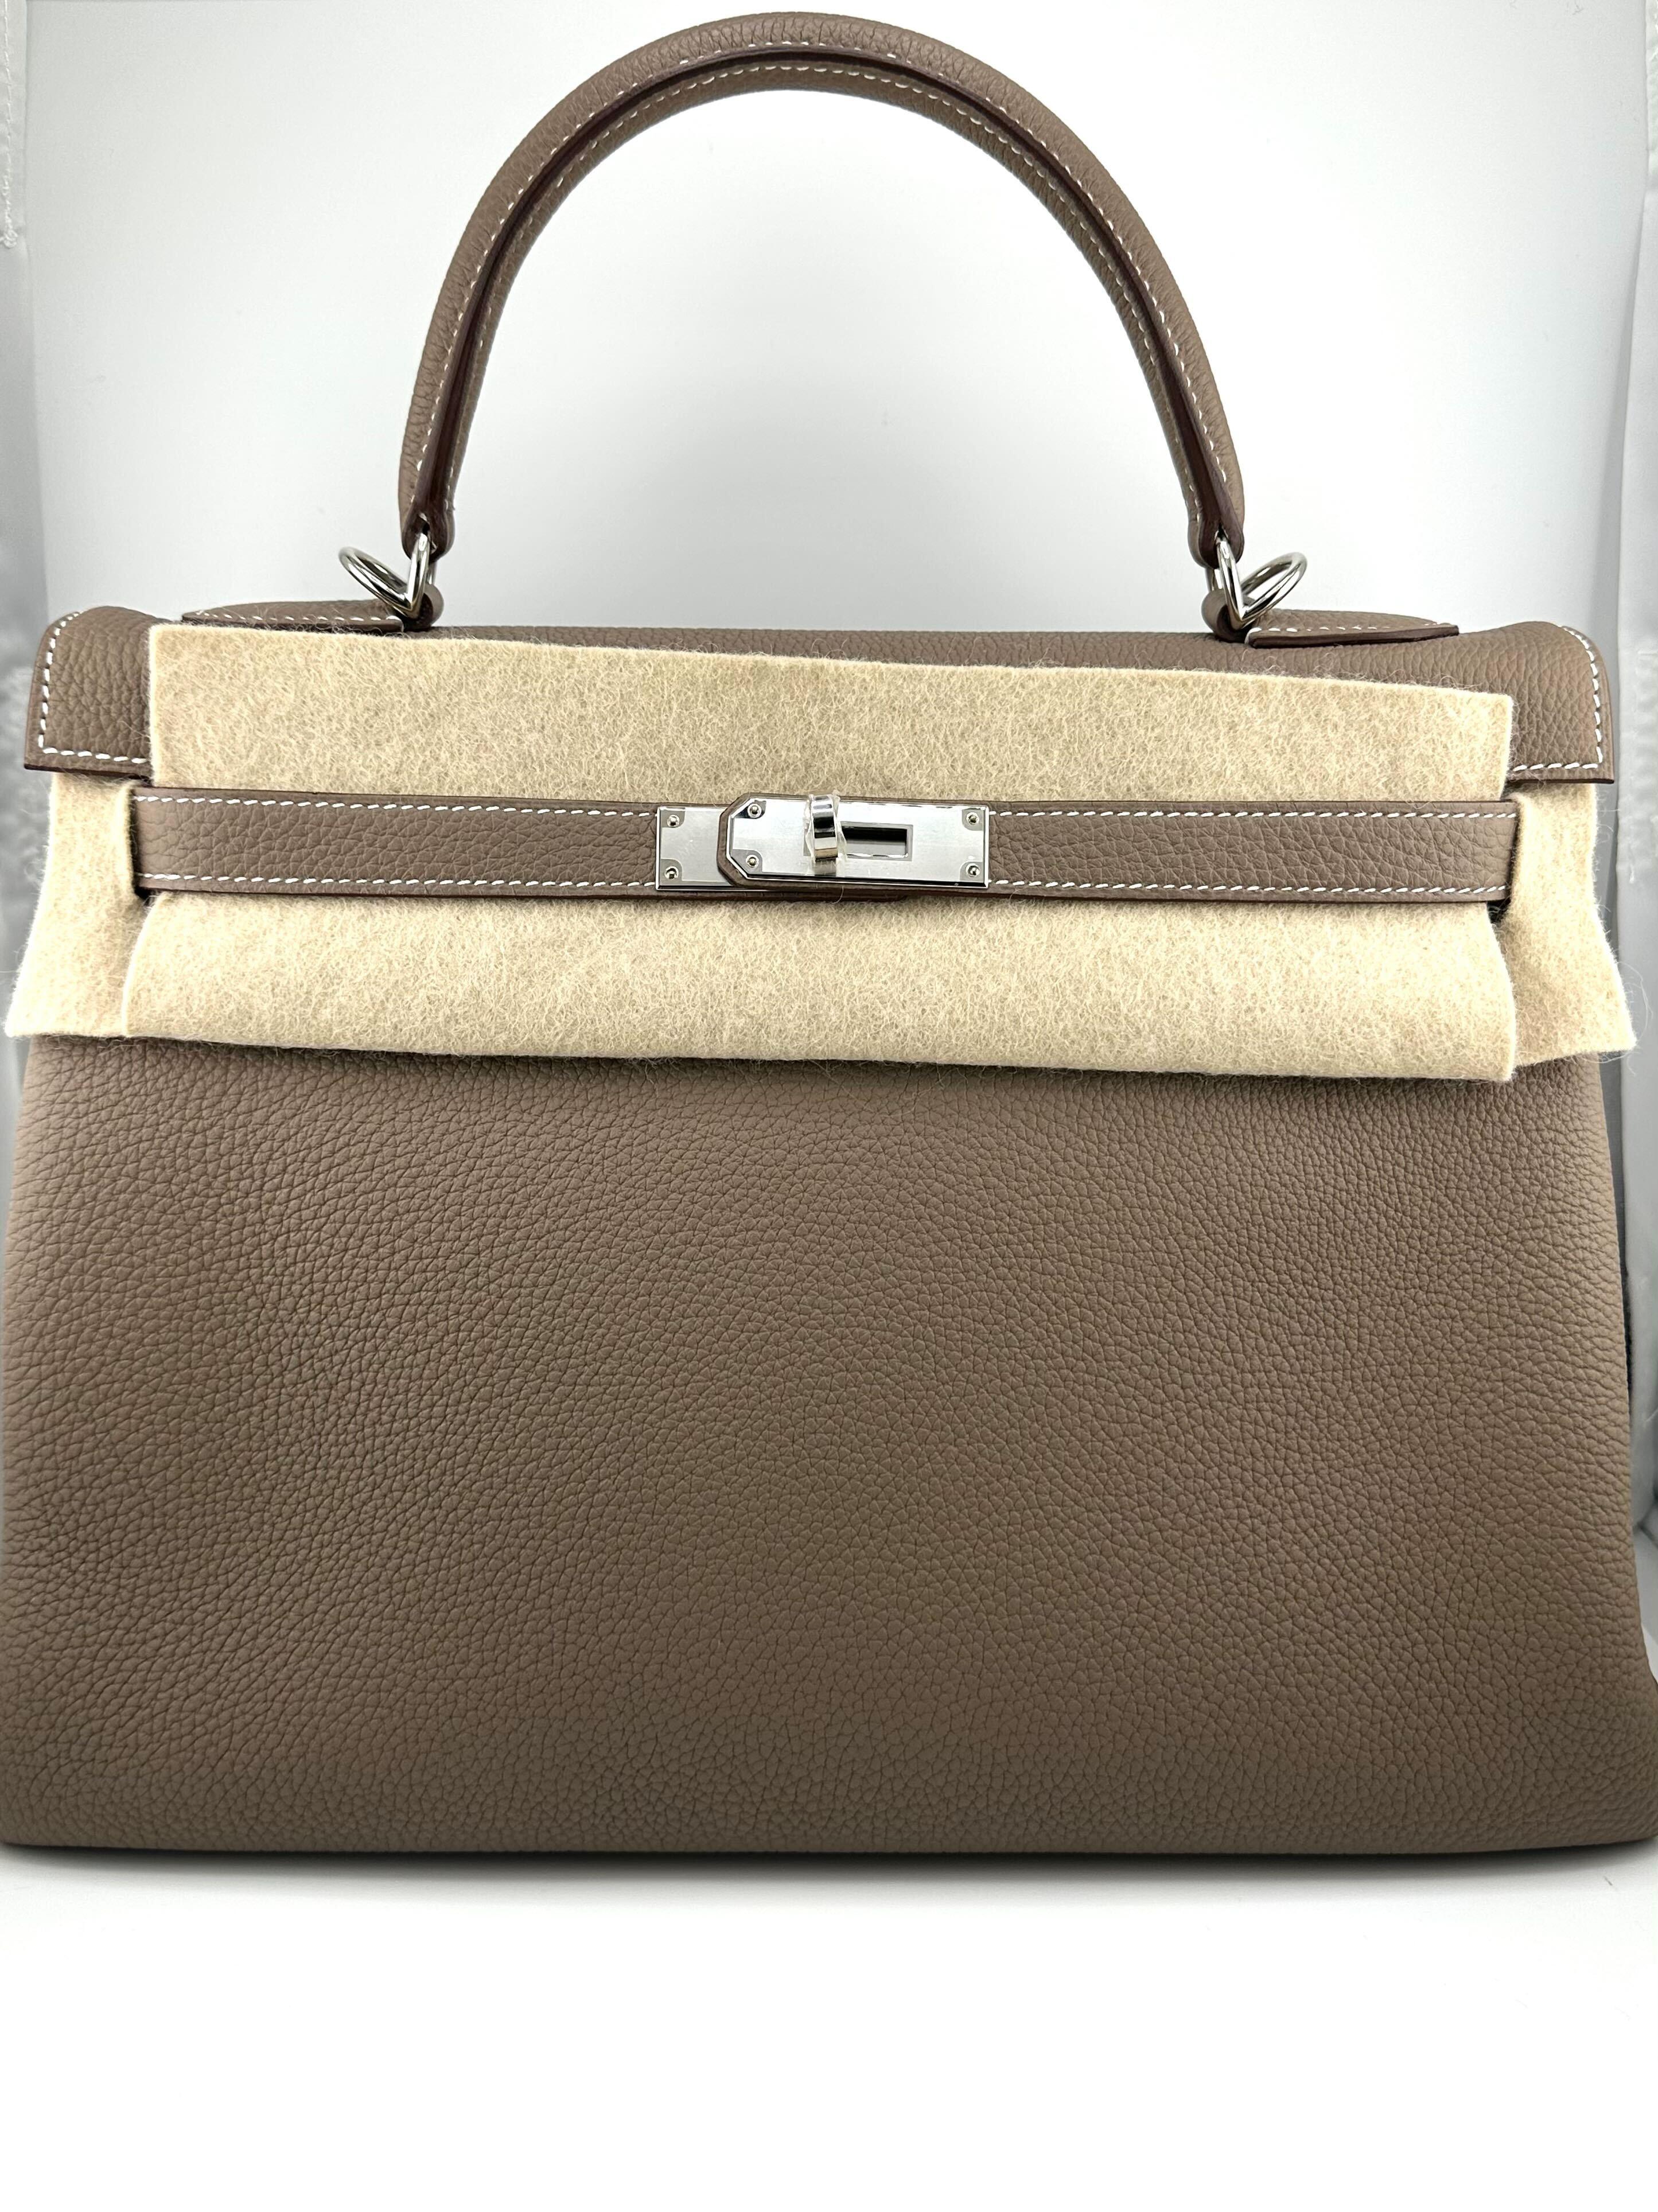 Hermes Kelly II Retourne 32 Togo Calfskin 18 Etoupe Palladium Hardware
 
Condition & Year: Brand New 2022
Material: Togo Calfskin Leather
Measurements: (L)32cm x (H)23cm x (W)10.5cm
Hardware: Palladium
 
*Comes in full original packaging.
*Includes